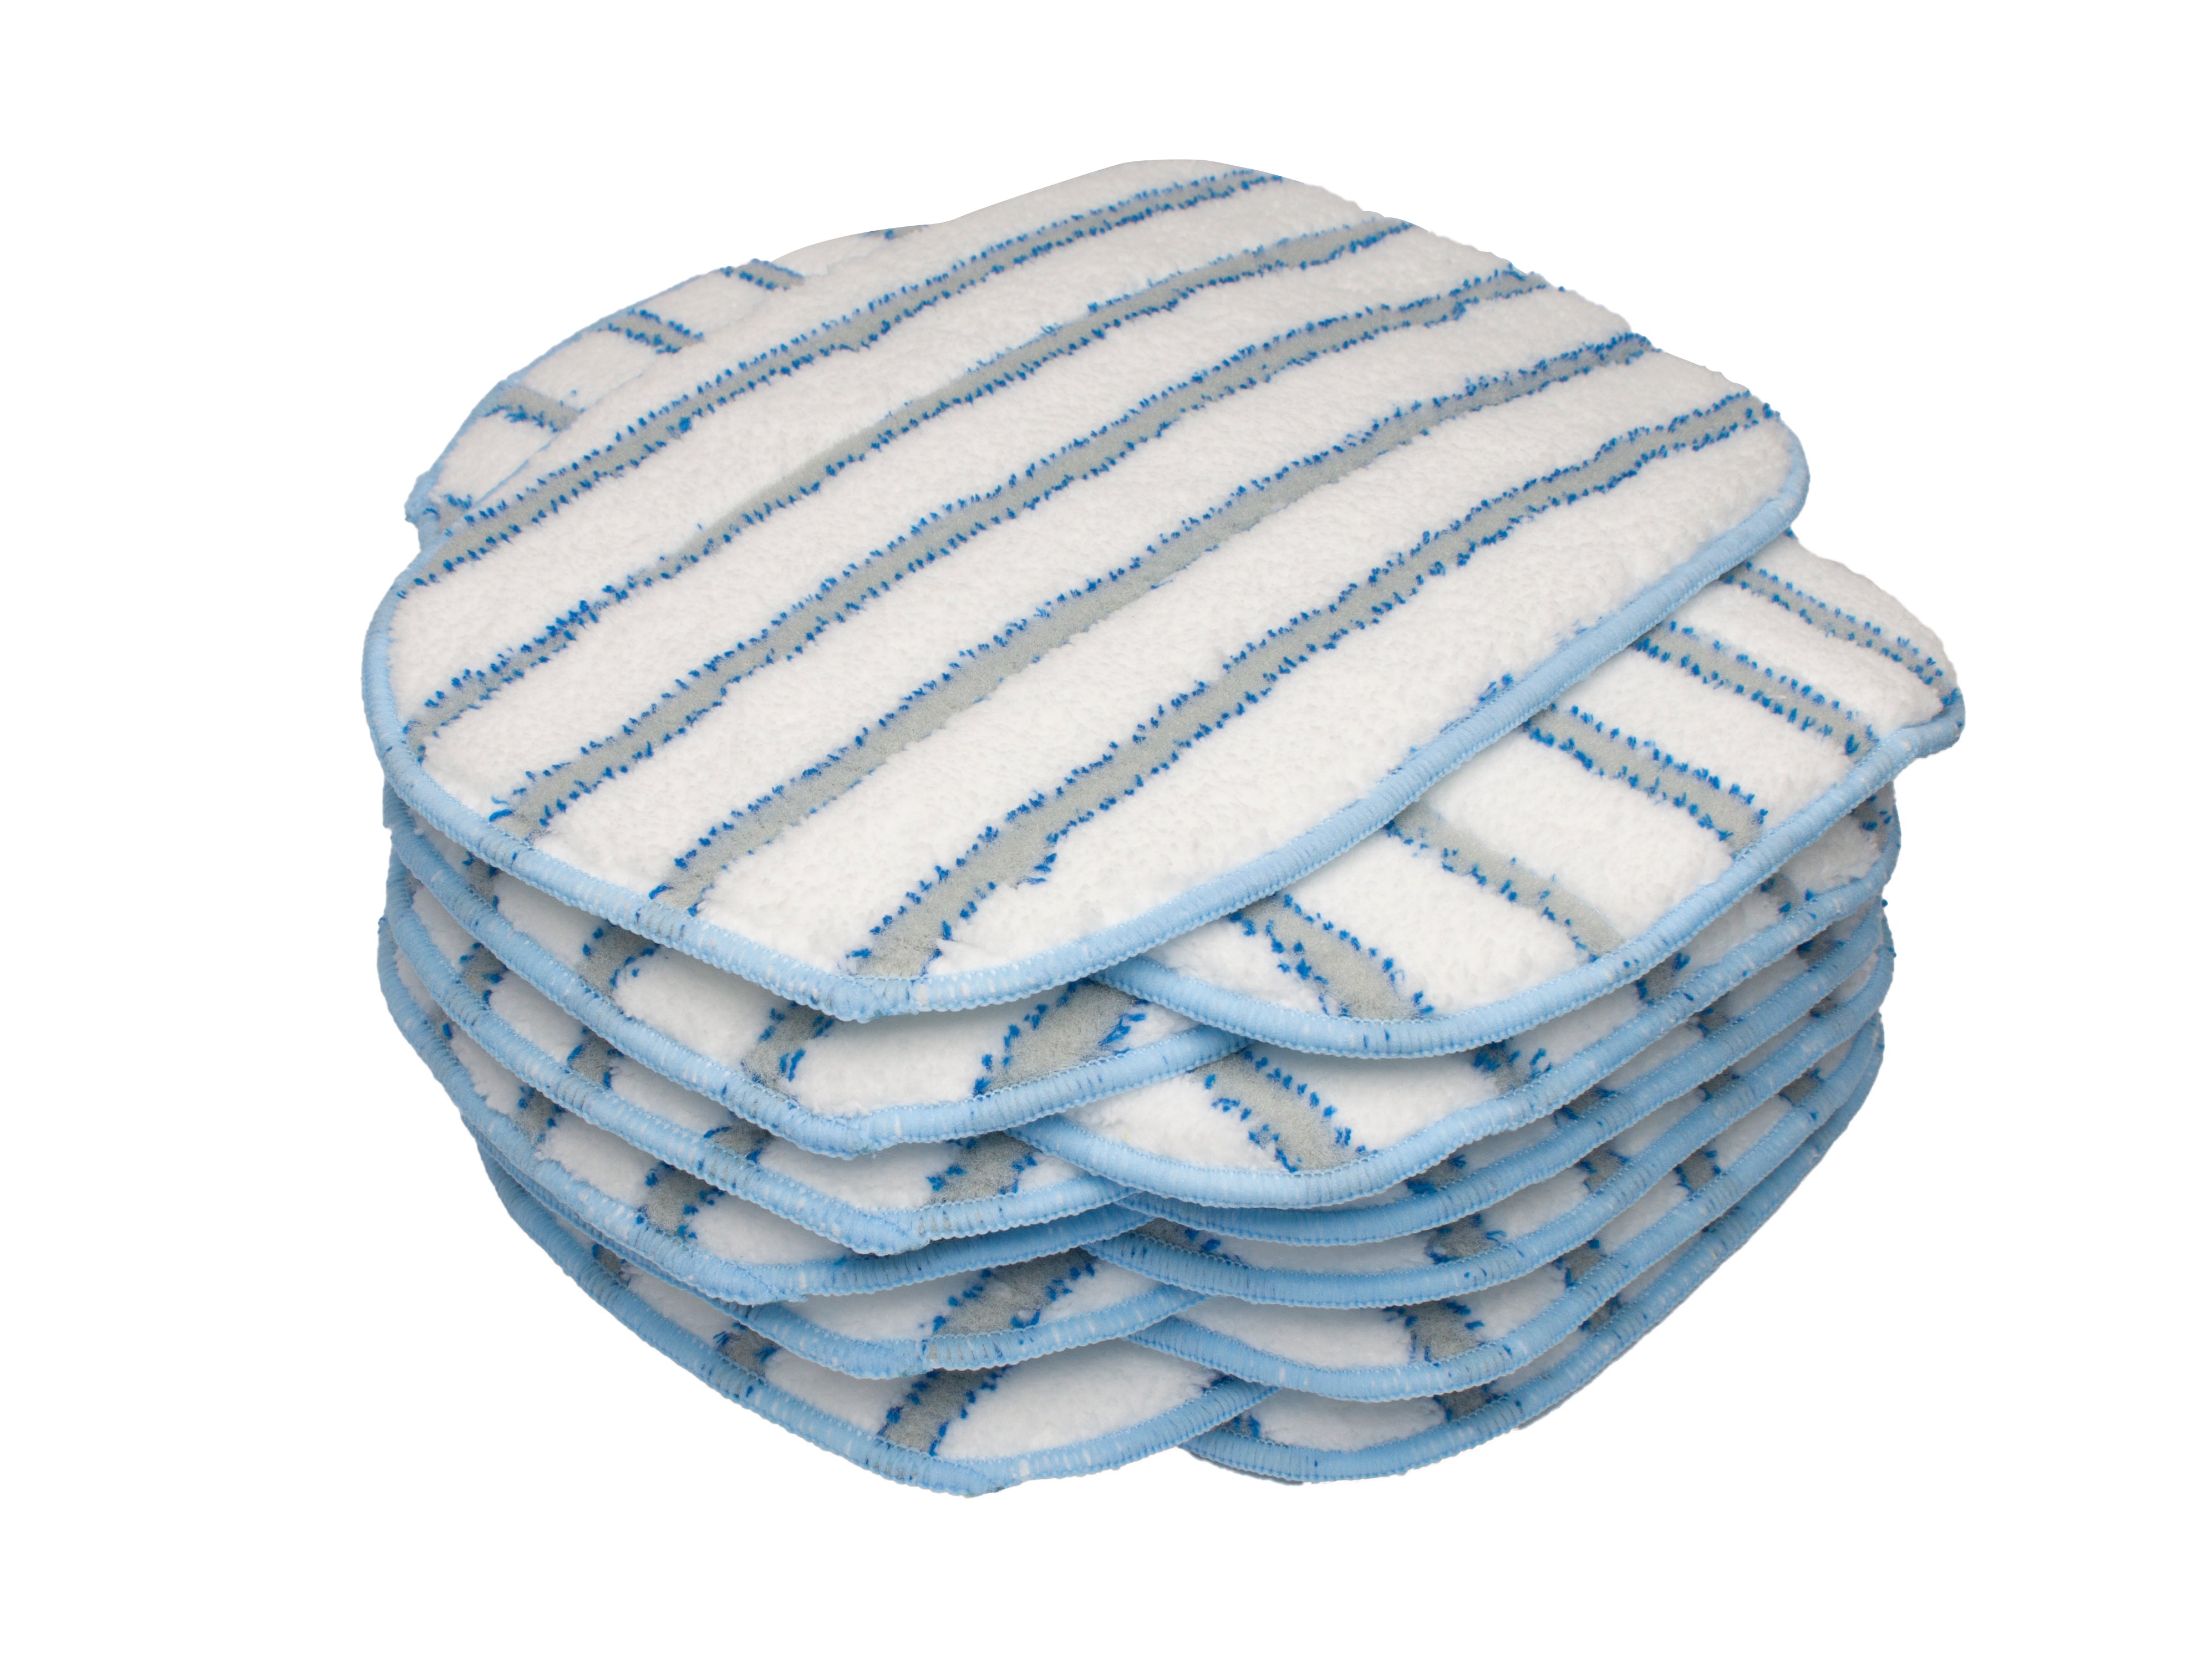 LTWHOME Microfiber Scrubbing Mop Pads Fit for McCulloch MC1375, MC1385 Steam Cleaner, Compatiable with McCulloch A1375-101(Pack of 12)